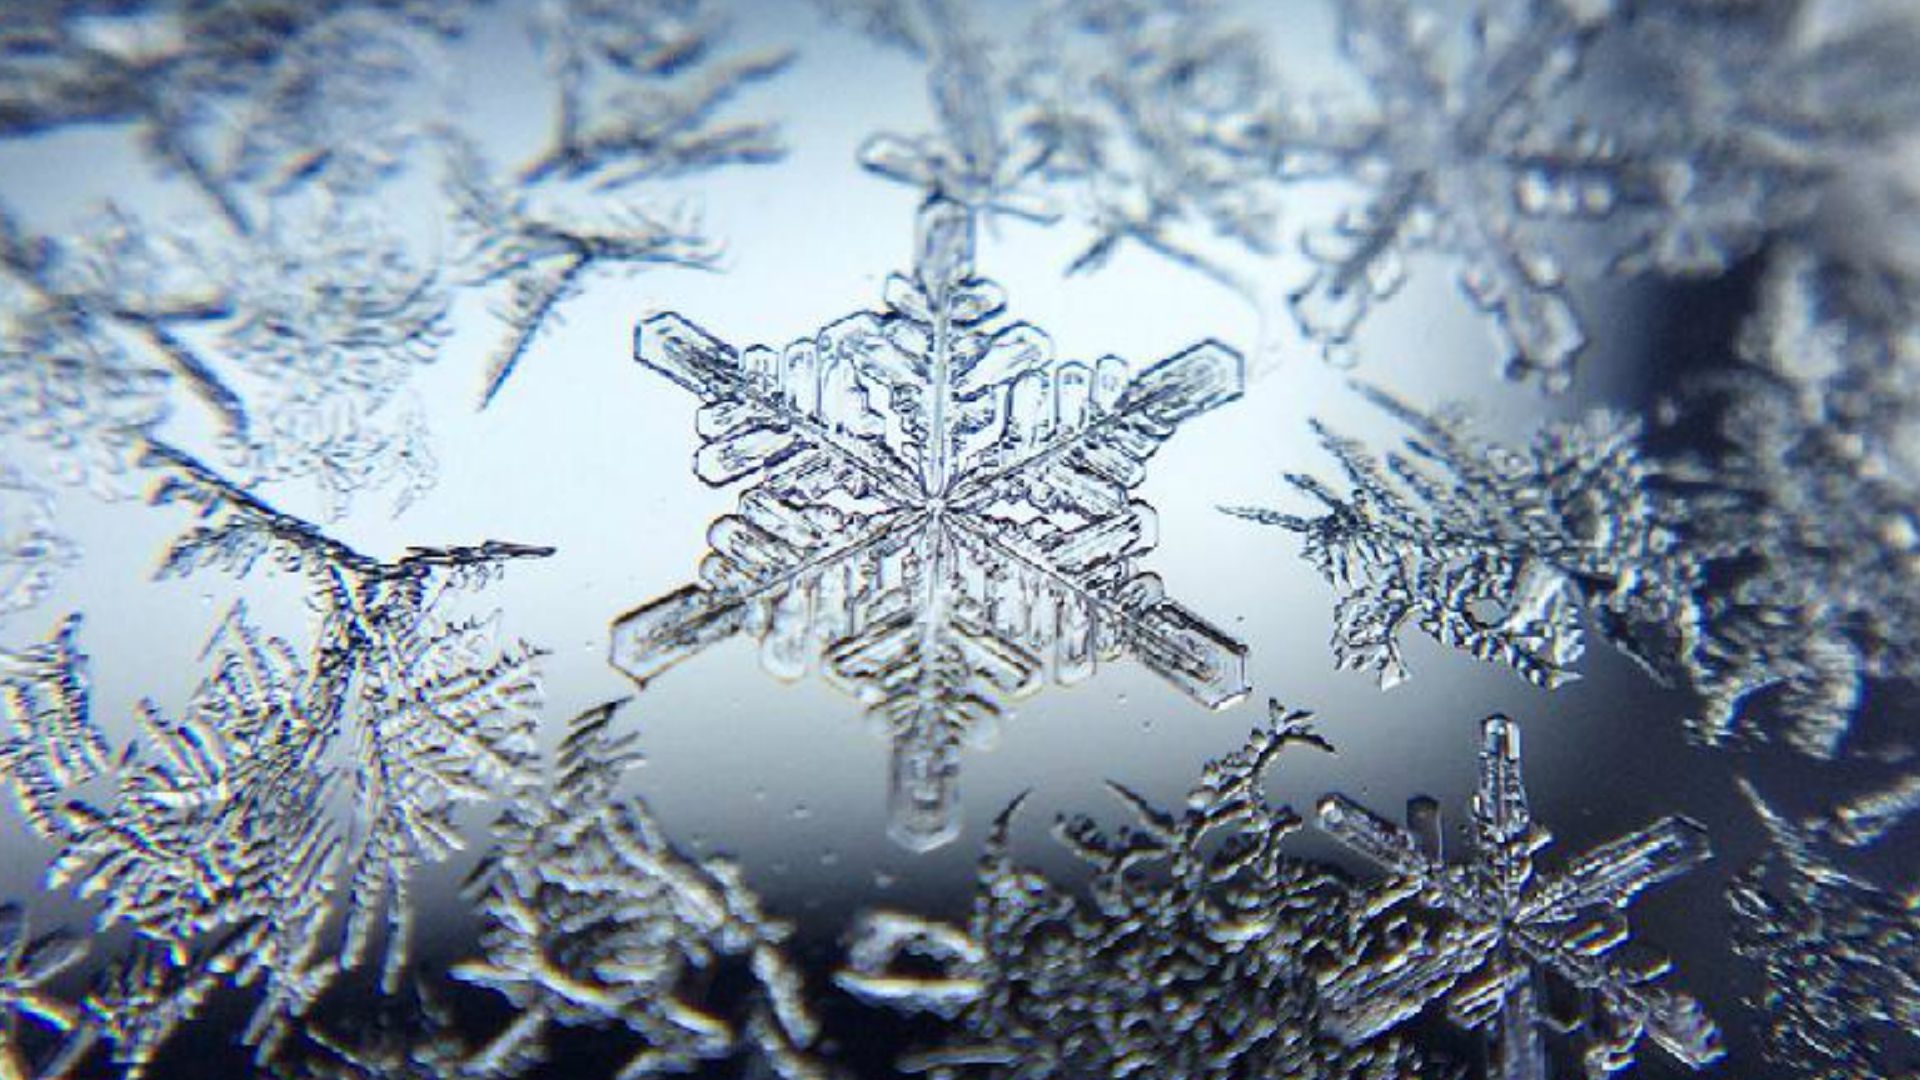 How history's first photos of snowflakes were made